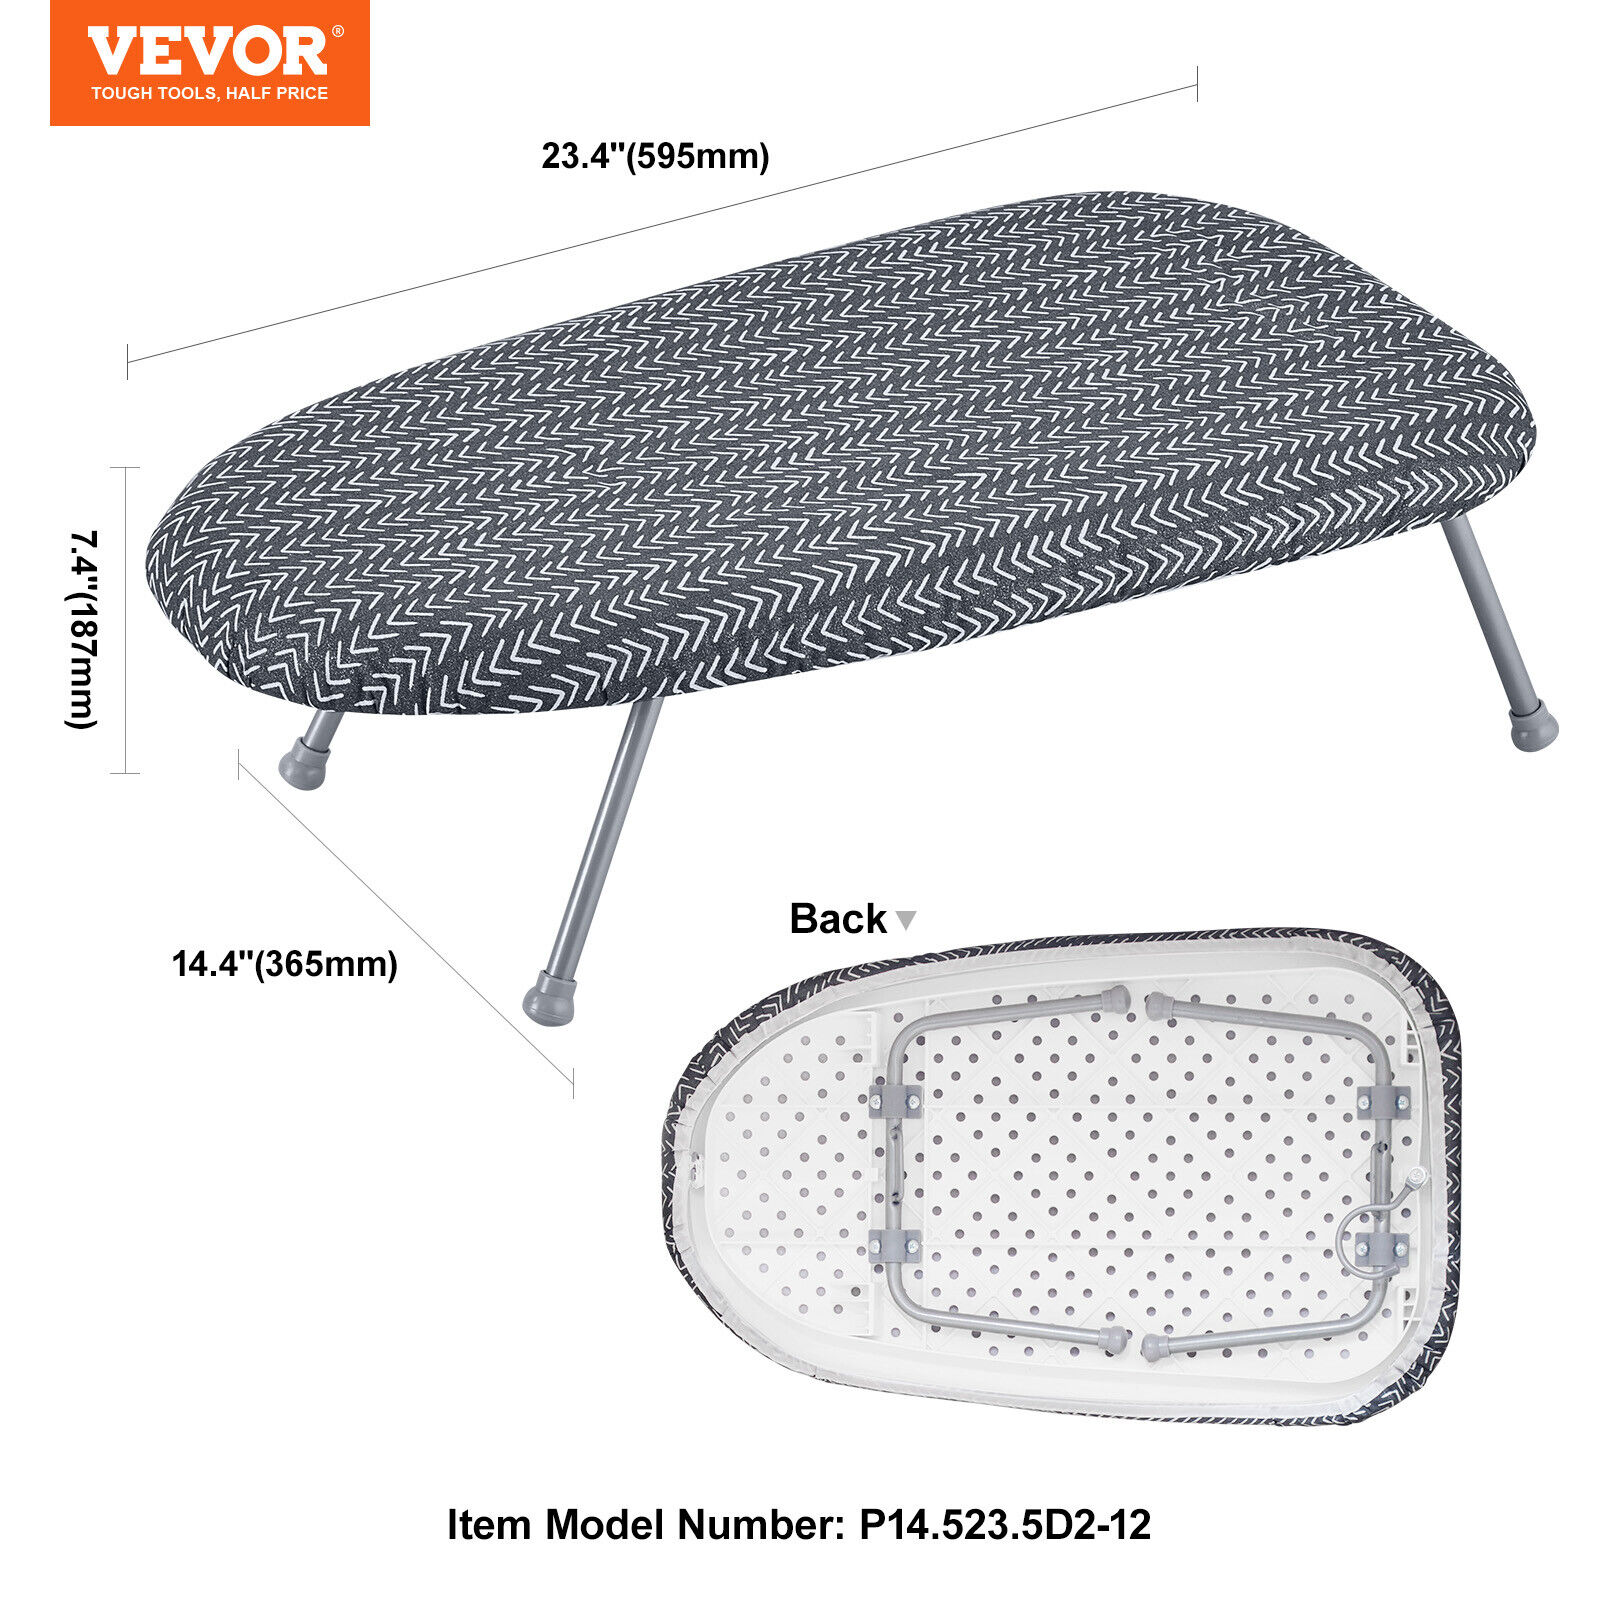 VEVOR Tabletop Ironing Board 23.4x14.4 in Small Iron Board Heat Resistant Cover